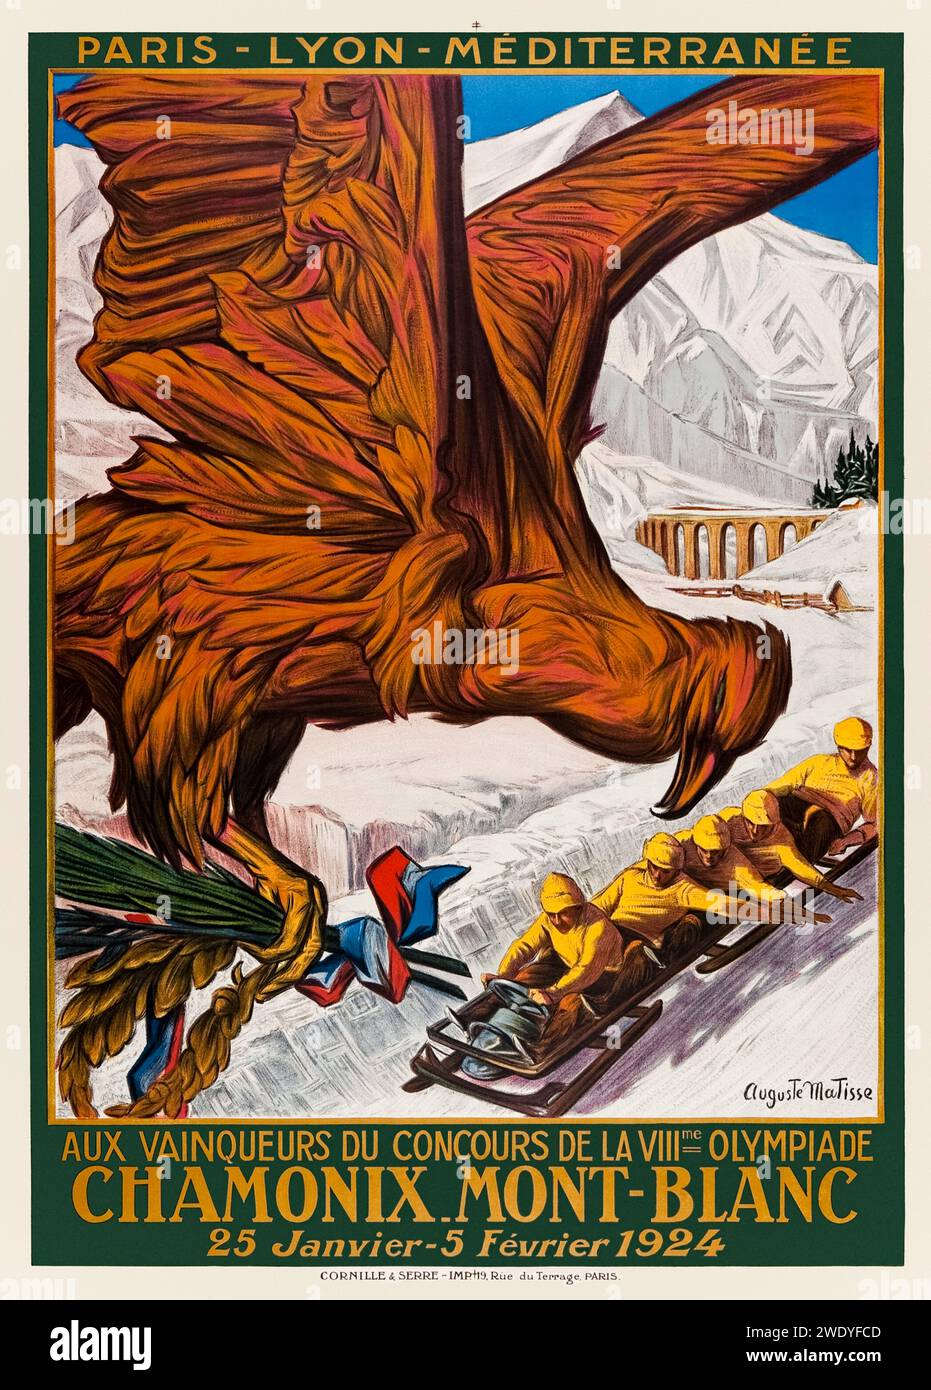 ‘Aux Vainqueurs du Concours de la VIII Olympiade Chamonix, Mont-Blanc 25 Janvier – 5 Fevrier 1924’ ['To the Winners of the Competition of the VIII Olympiad Chamonix, Mont Blanc 25 January – 5 February 1924] Poster showing an eagle holding a wreath and olive branches tied with French flag flying over a bobsleigh team with the mountain and railway bridge in the background. Artwork by Auguste Matisse (1866-1931) for Paris Lyon Mediteranée Company (PLM) railway. Stock Photo